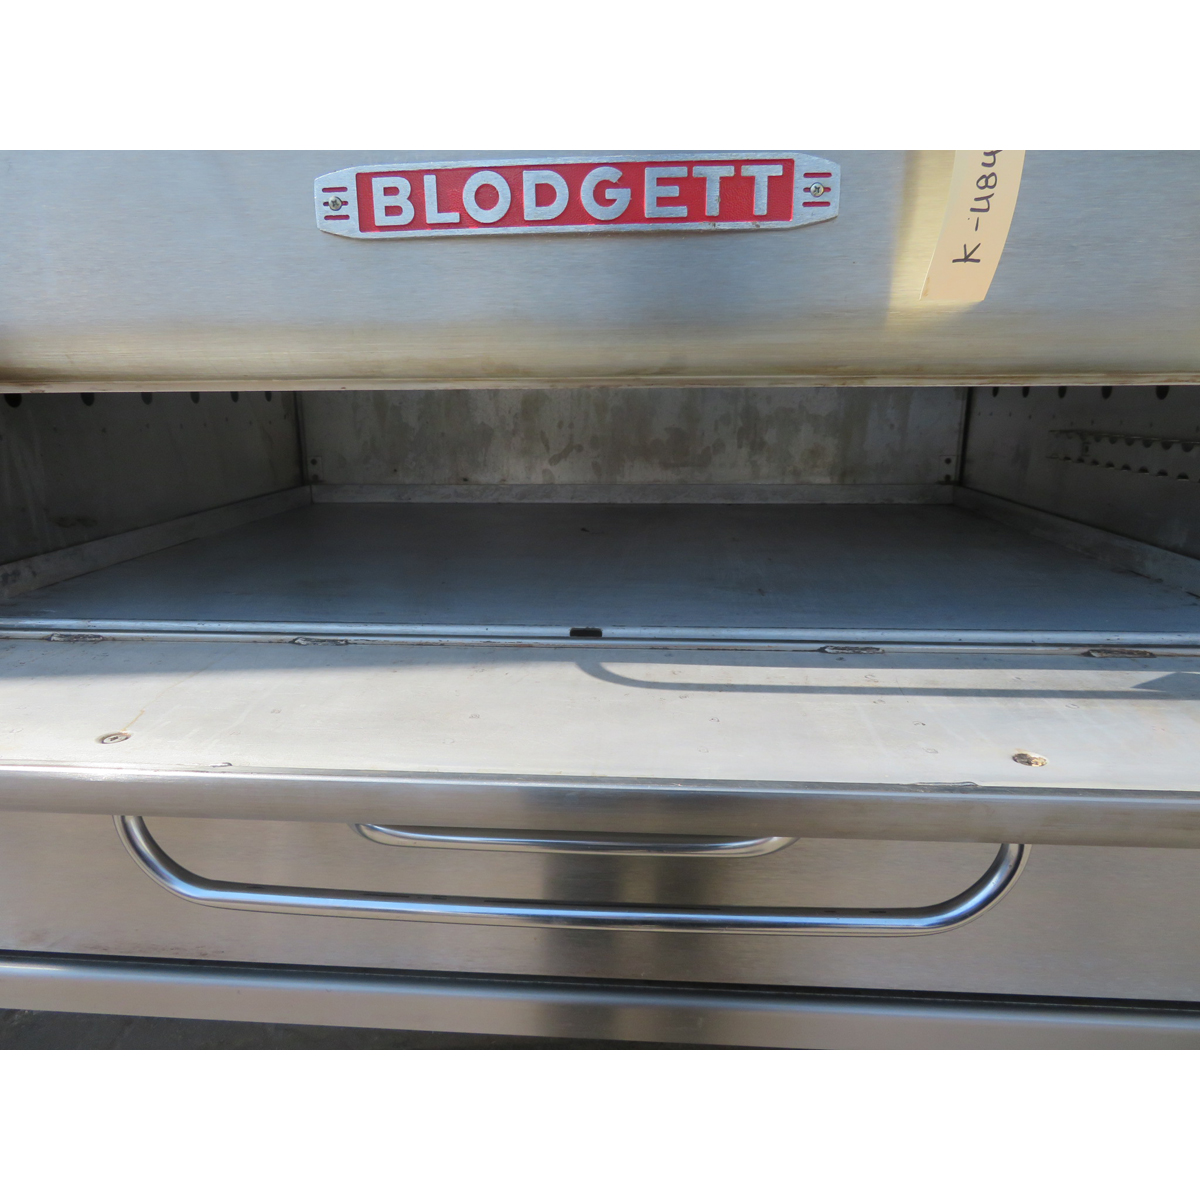 Blodgett 981 Deck Oven, Used Great Condition image 2